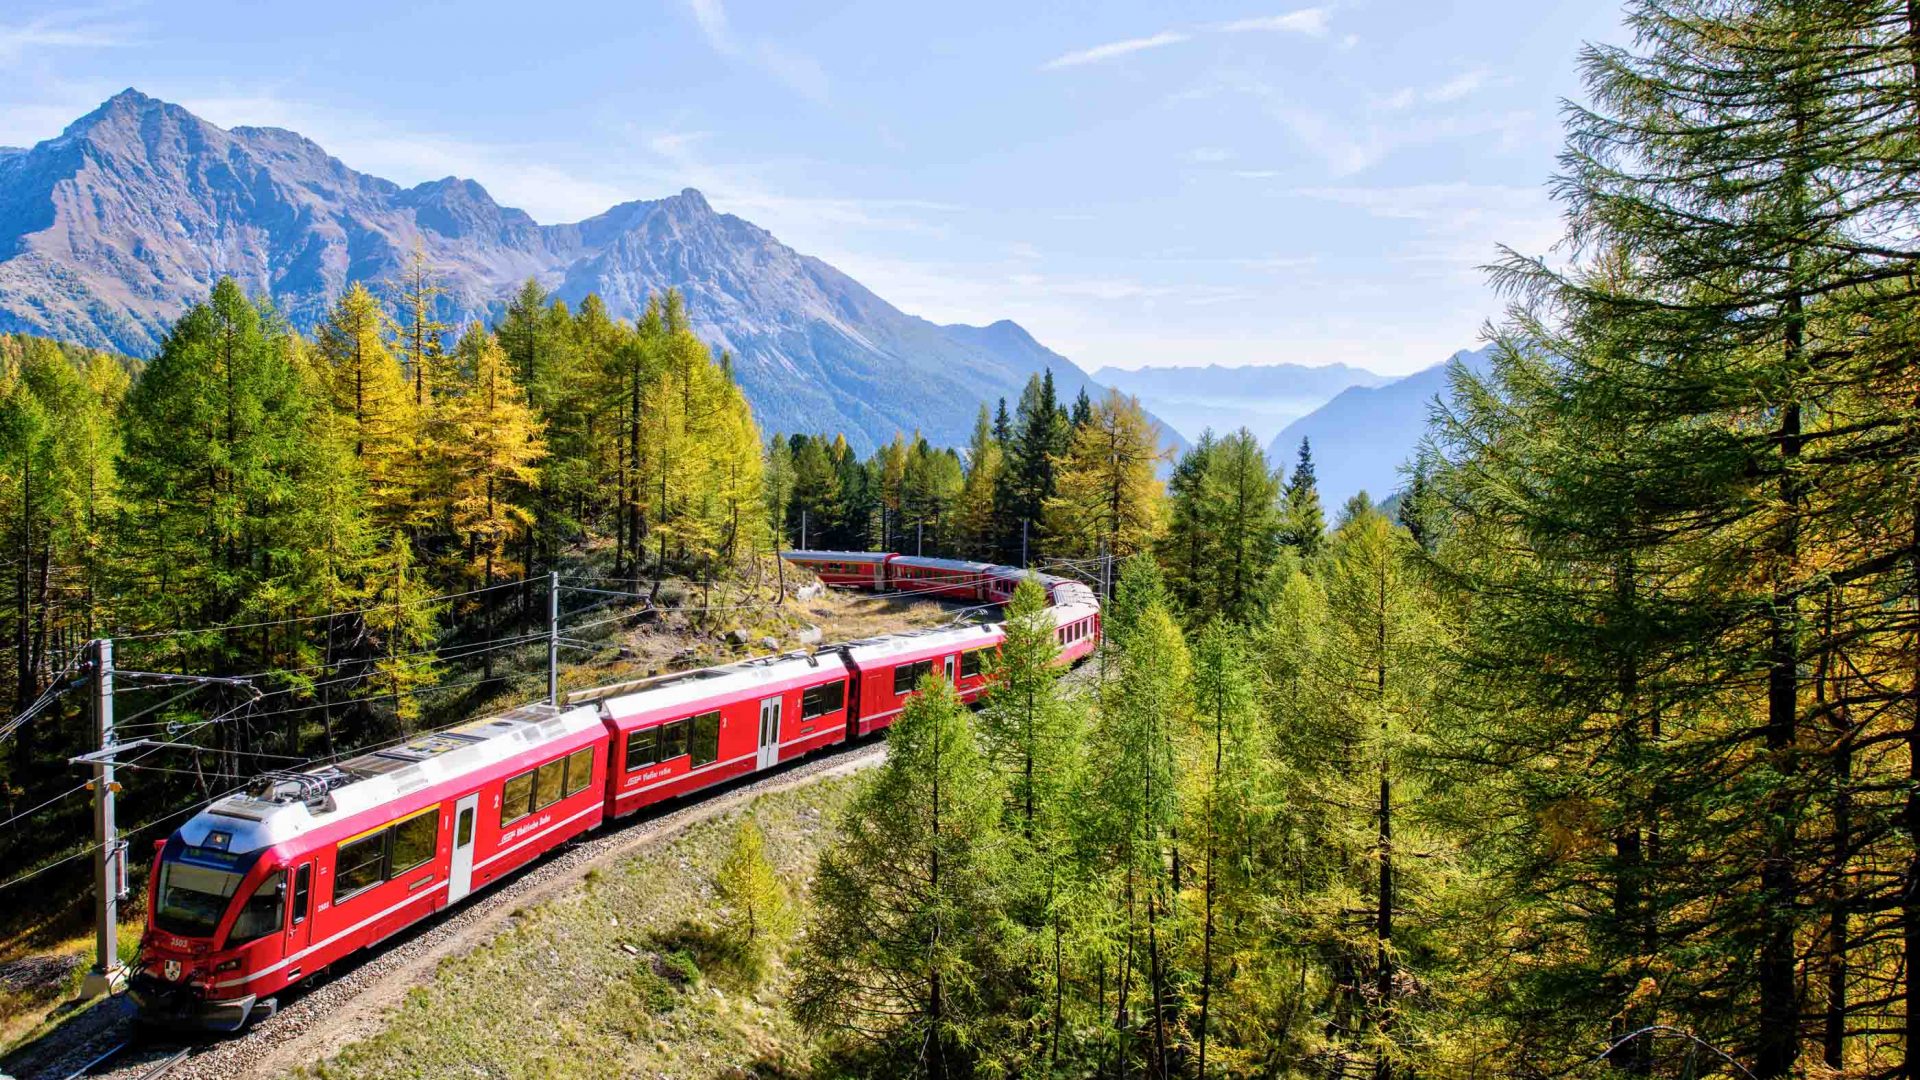 A red train traveling through green trees with mountains in the background.